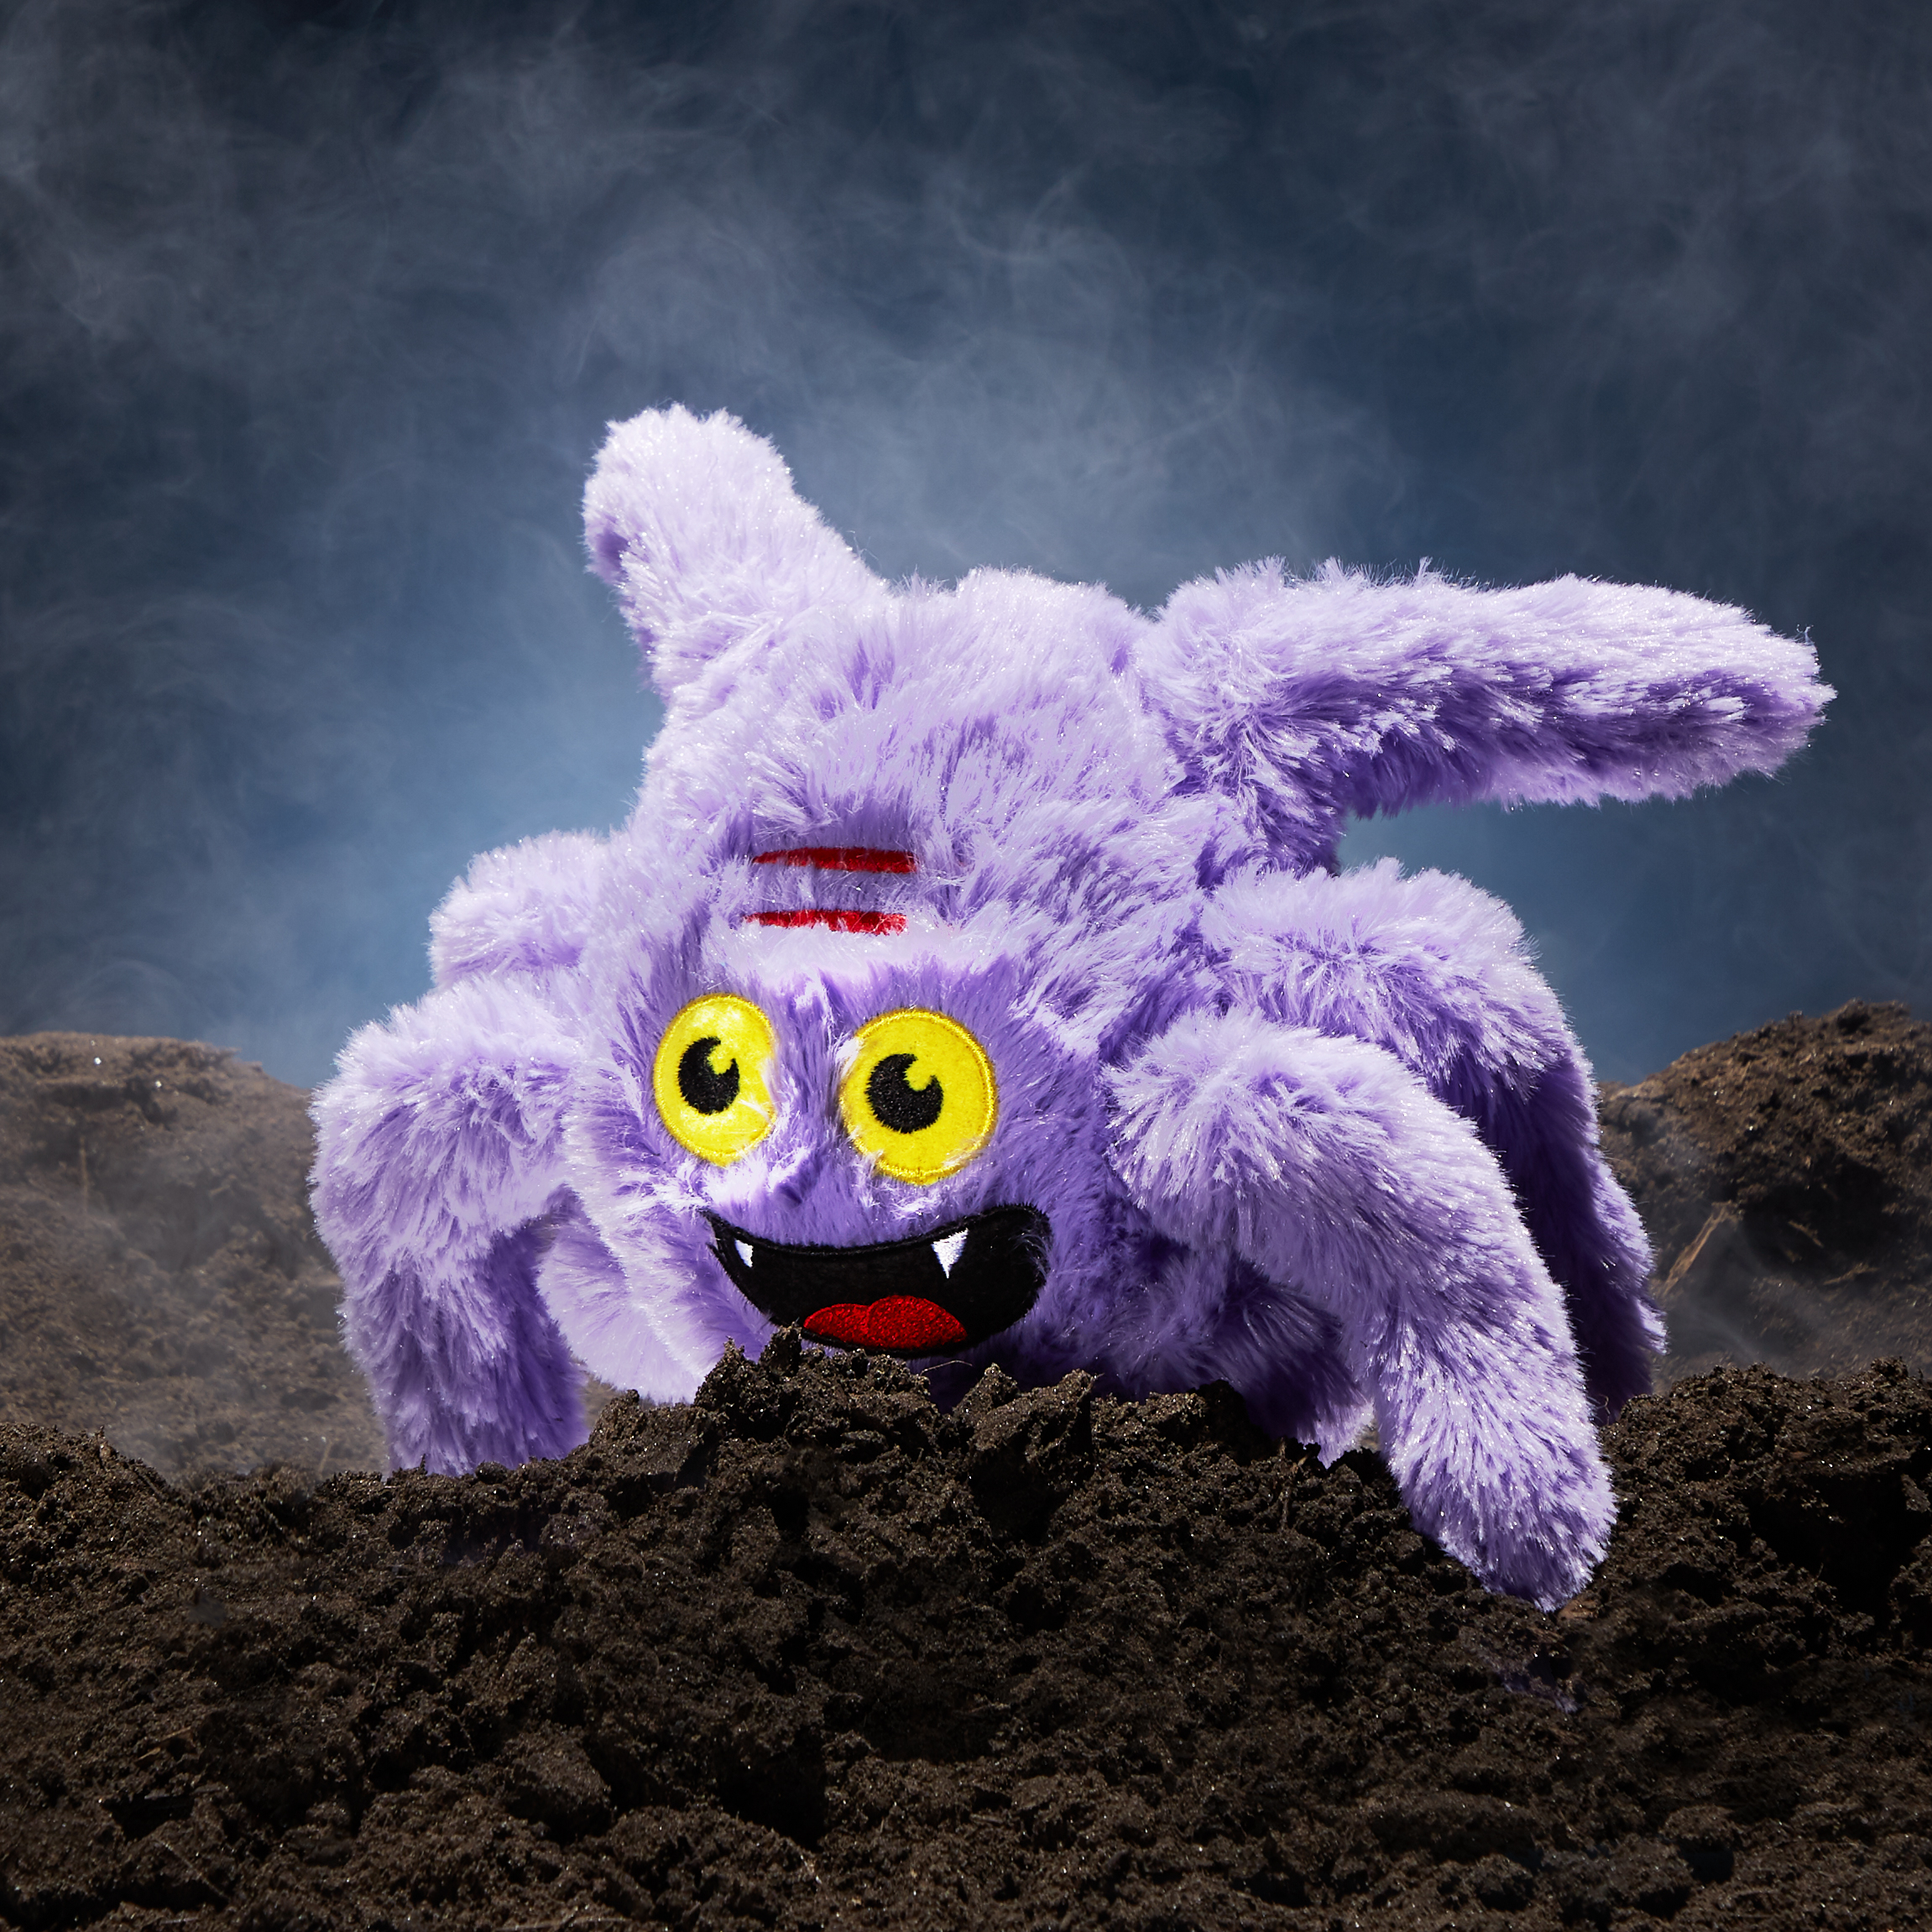 RETAIL_HAUNTEDHOUNDS_PRODUCT-STYLED_0090_RAVENOUS-RUPERT-SPIDER.jpg